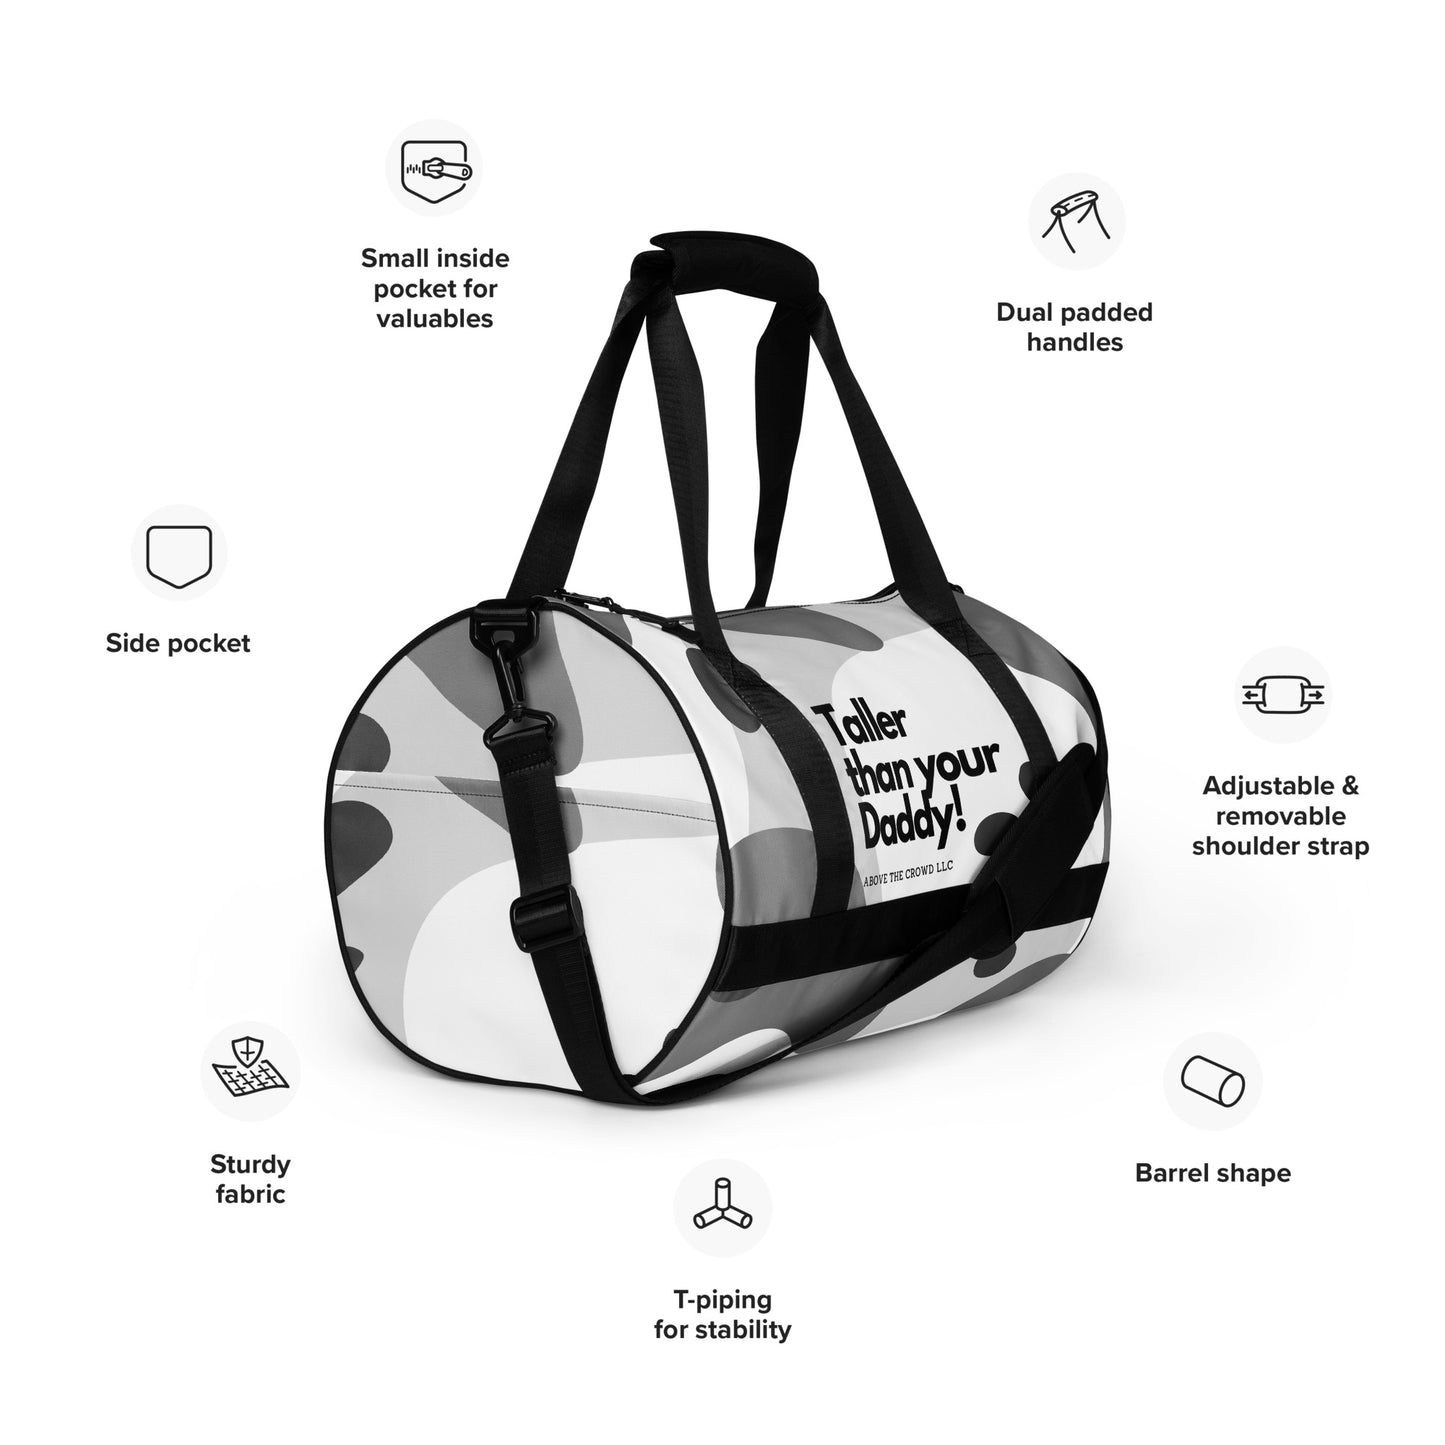 Gray Scale 'Taller than your Daddy' Gym Bag